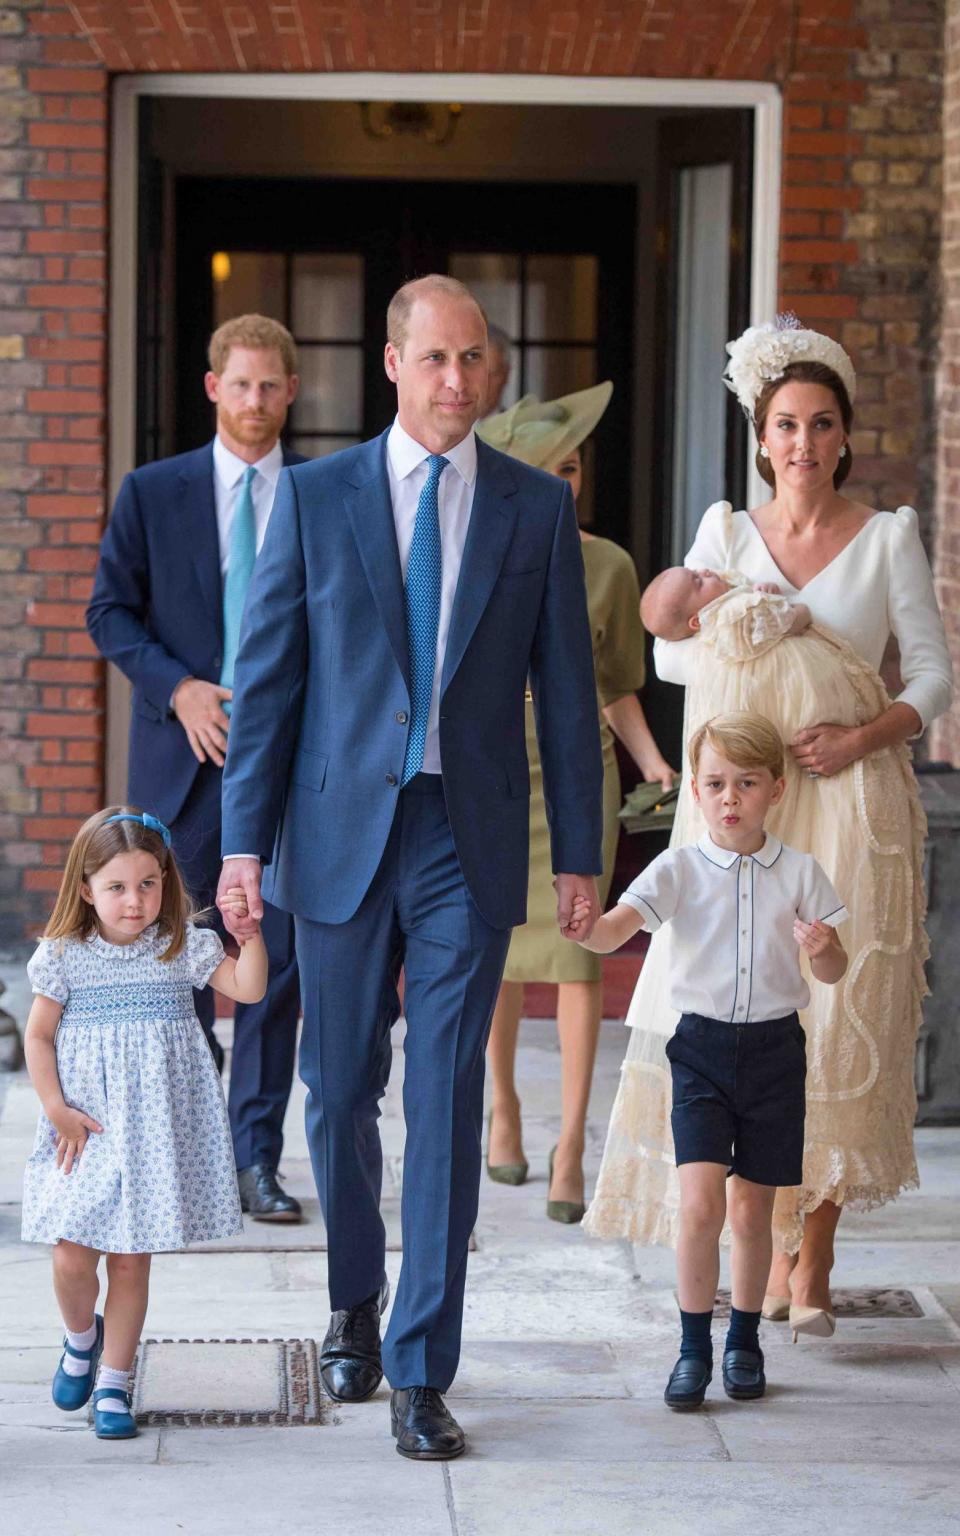 Prince Louis's baptism service in 2018